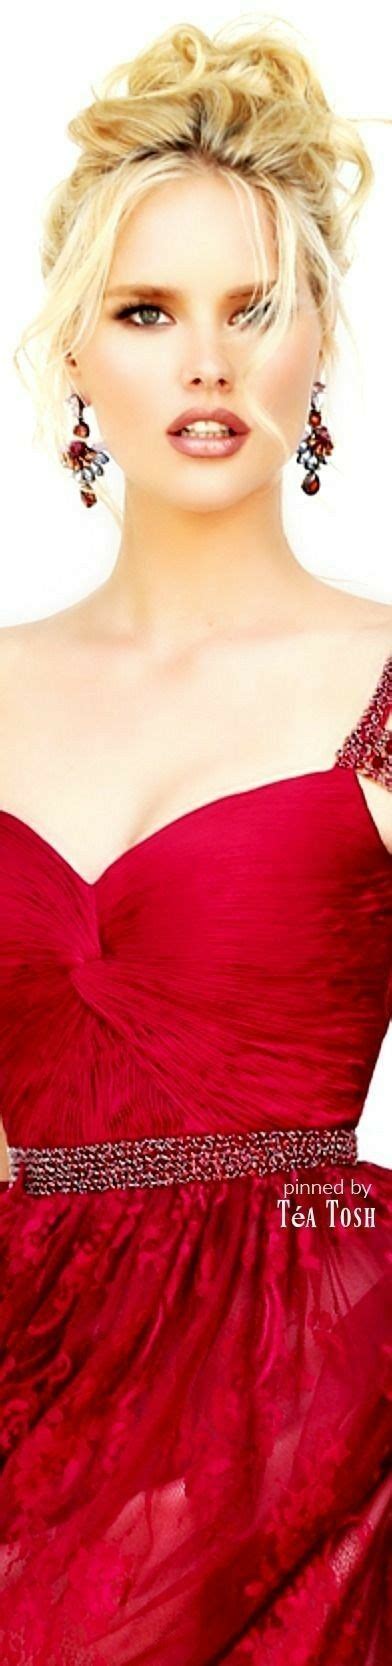 Pin By Jewelsinthecrown On Lady In Red Style Glamour Lady In Red